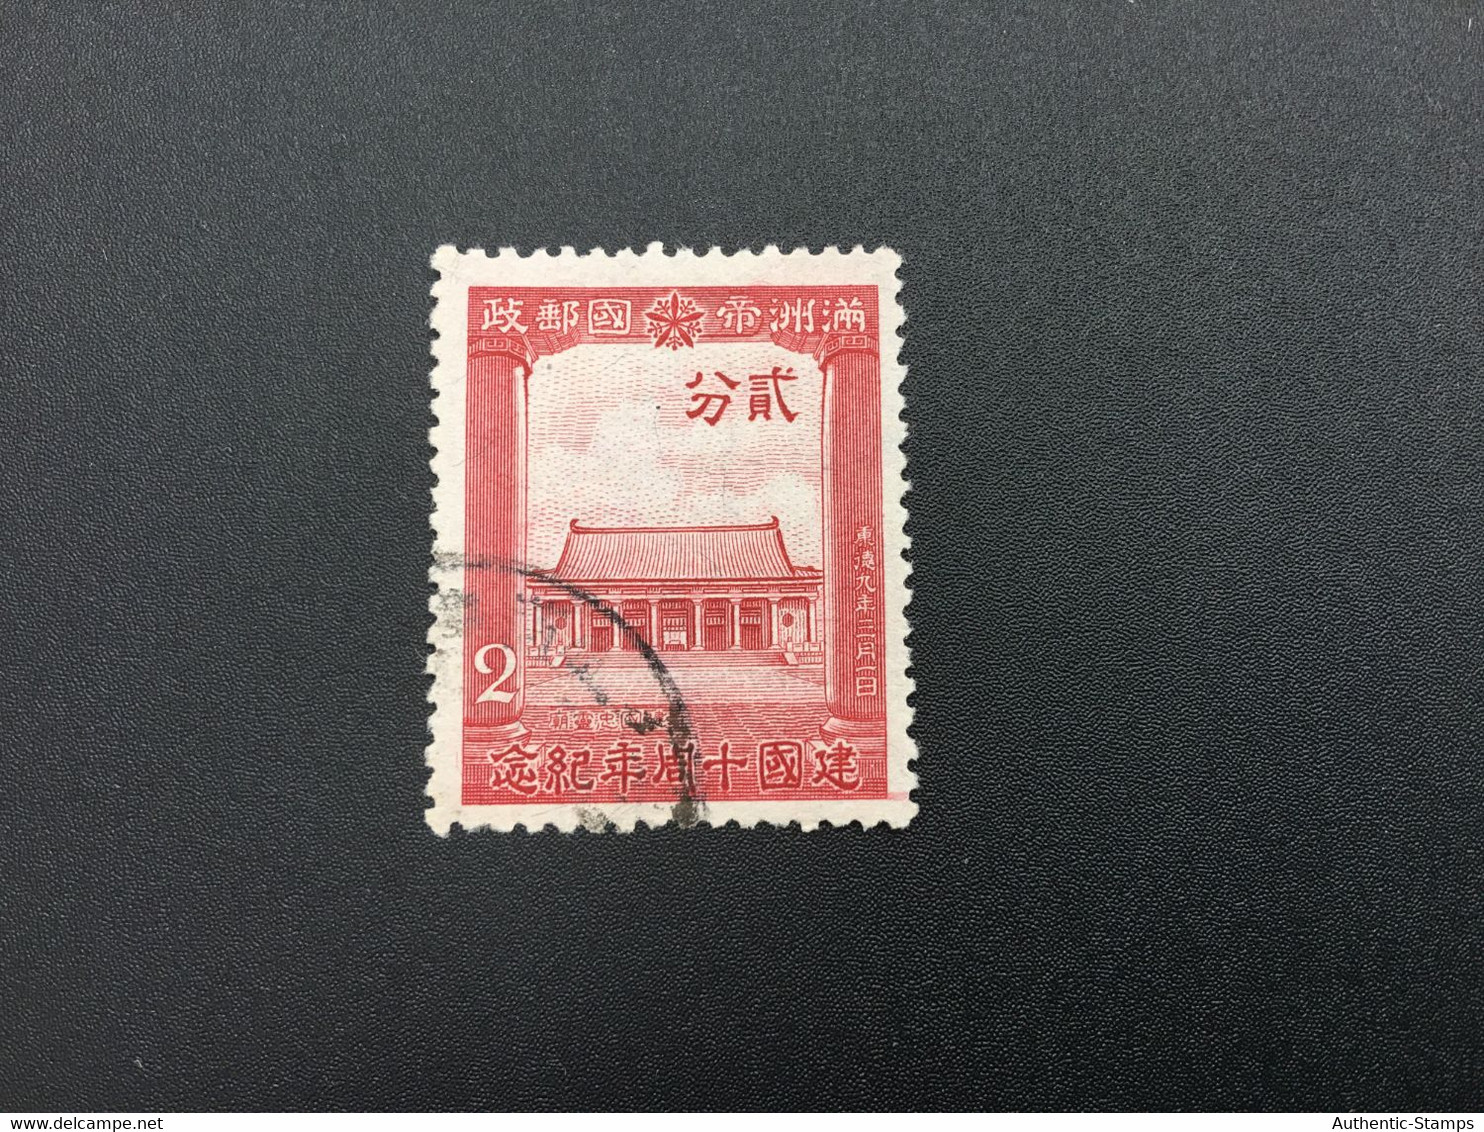 CHINA STAMP,  Manchuria, USED, TIMBRO, STEMPEL, CINA, CHINE, LIST 6721 - 1932-45 Mandchourie (Mandchoukouo)